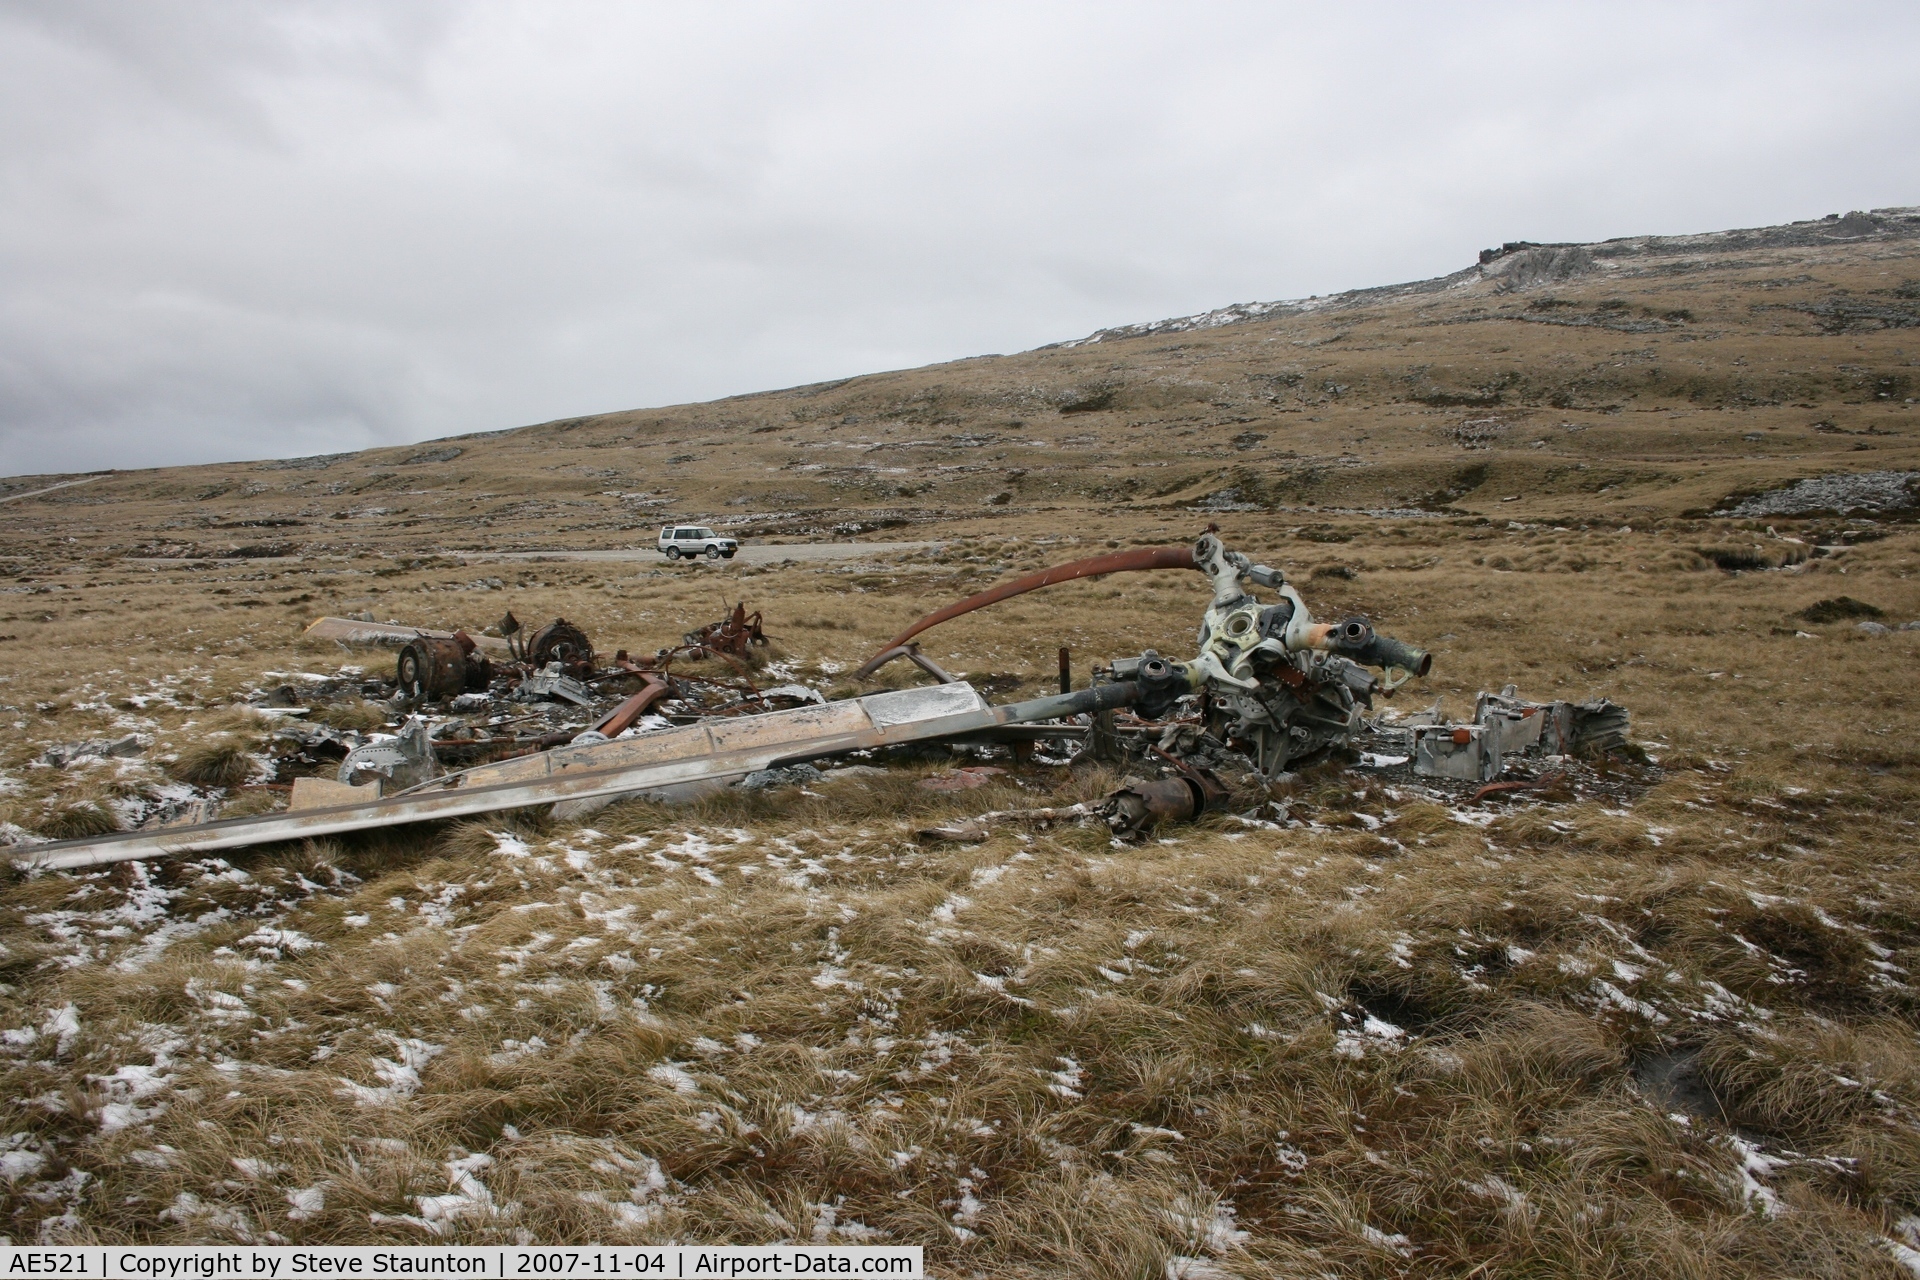 AE521, Boeing Vertol CH-47C Chinook C/N B-789/CG-102, Wrecked BV Chinook CH-47C of the Argentine AF located at the foot of Mount Kent, Falkland Island. This aircraft was destroyed during the 1982 Falklands Conflict.